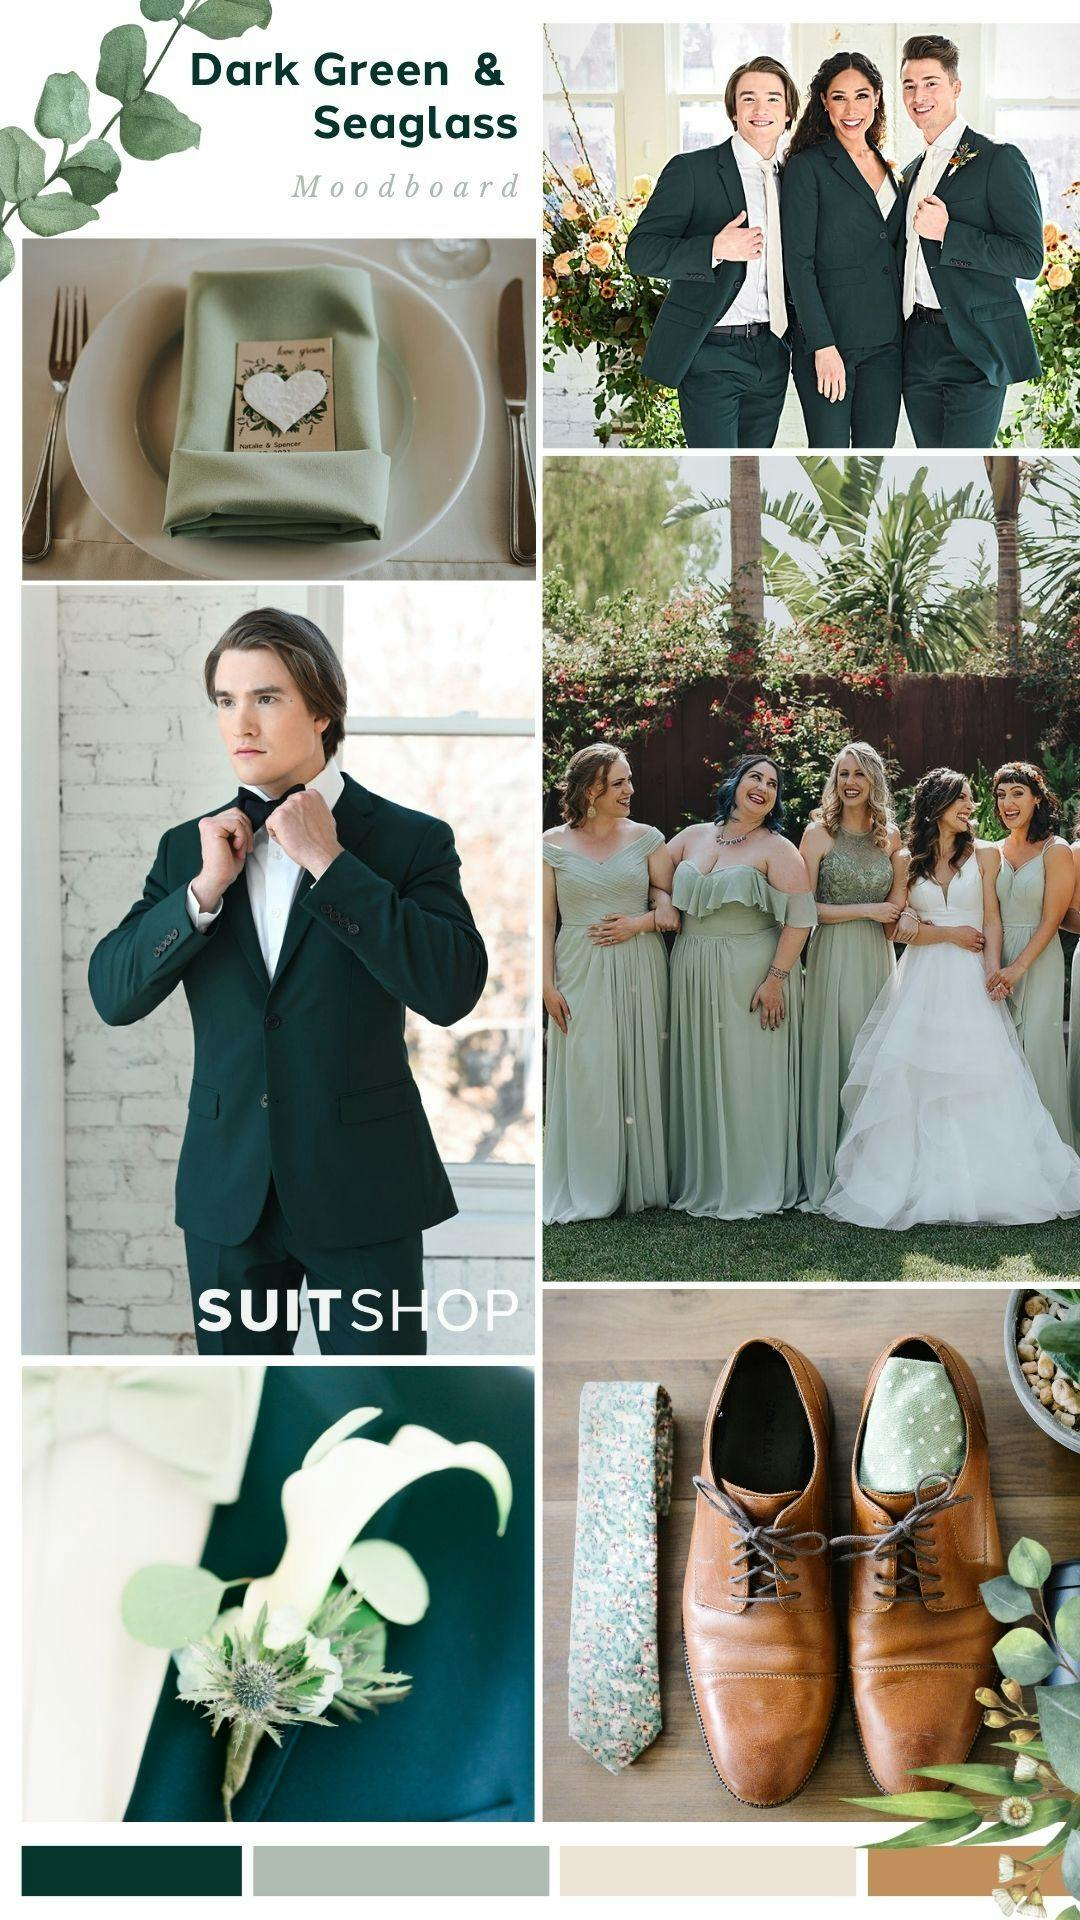 Green wedding theme mood board for summer color palette in forest green wedding suits and seafoam bridesmaids' dresses and seafoam accents.